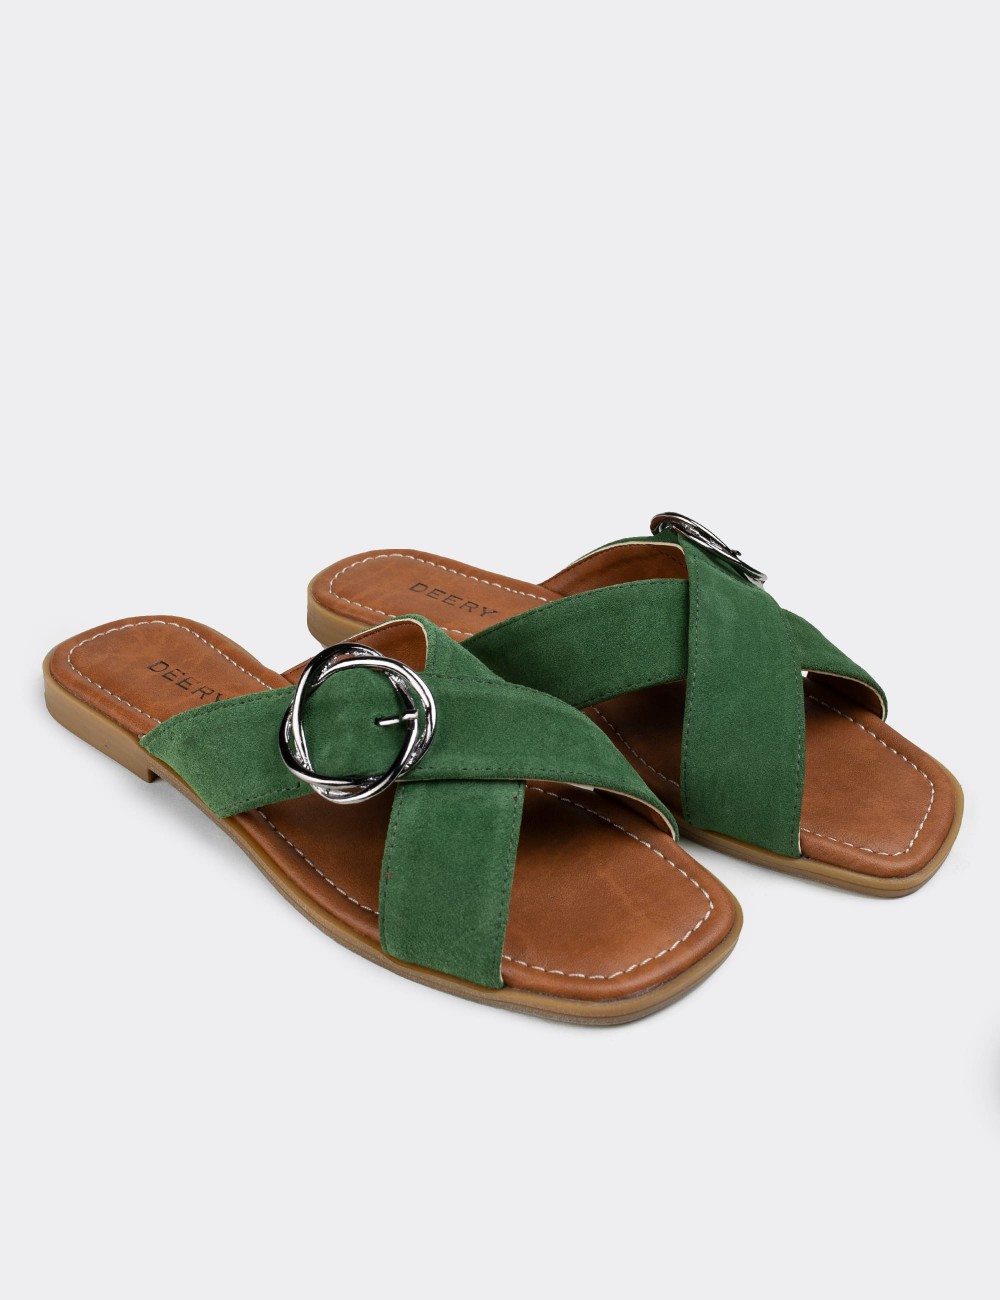 Green Suede Leather Sandals - E2136ZYSLC03